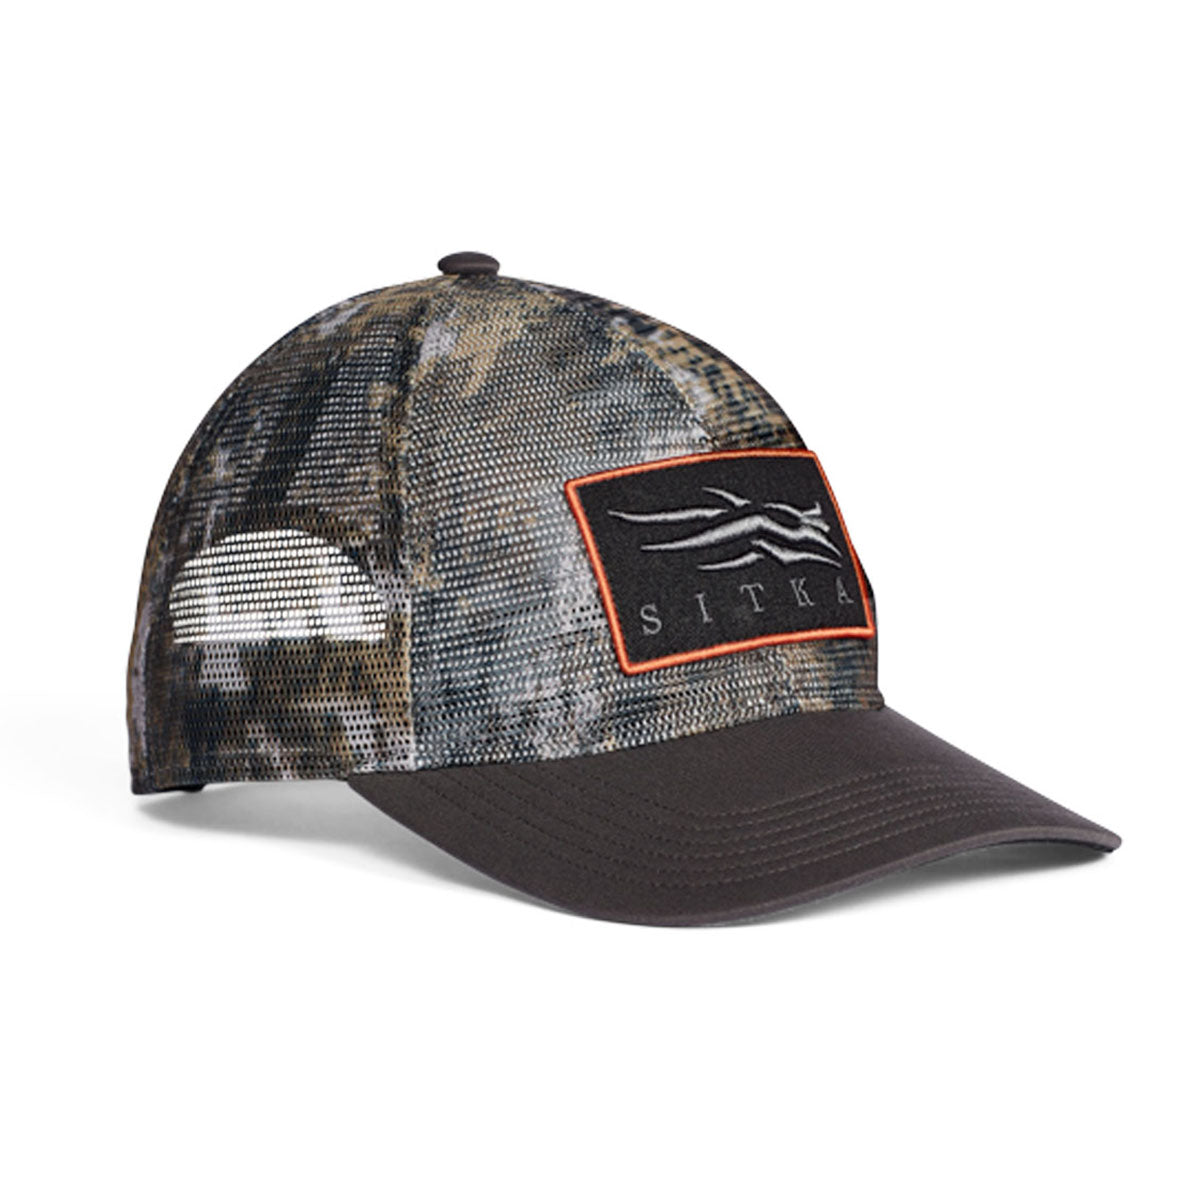 Sitka Icon Optifade Mesh Mid Pro Trucker in  by GOHUNT | Sitka - GOHUNT Shop